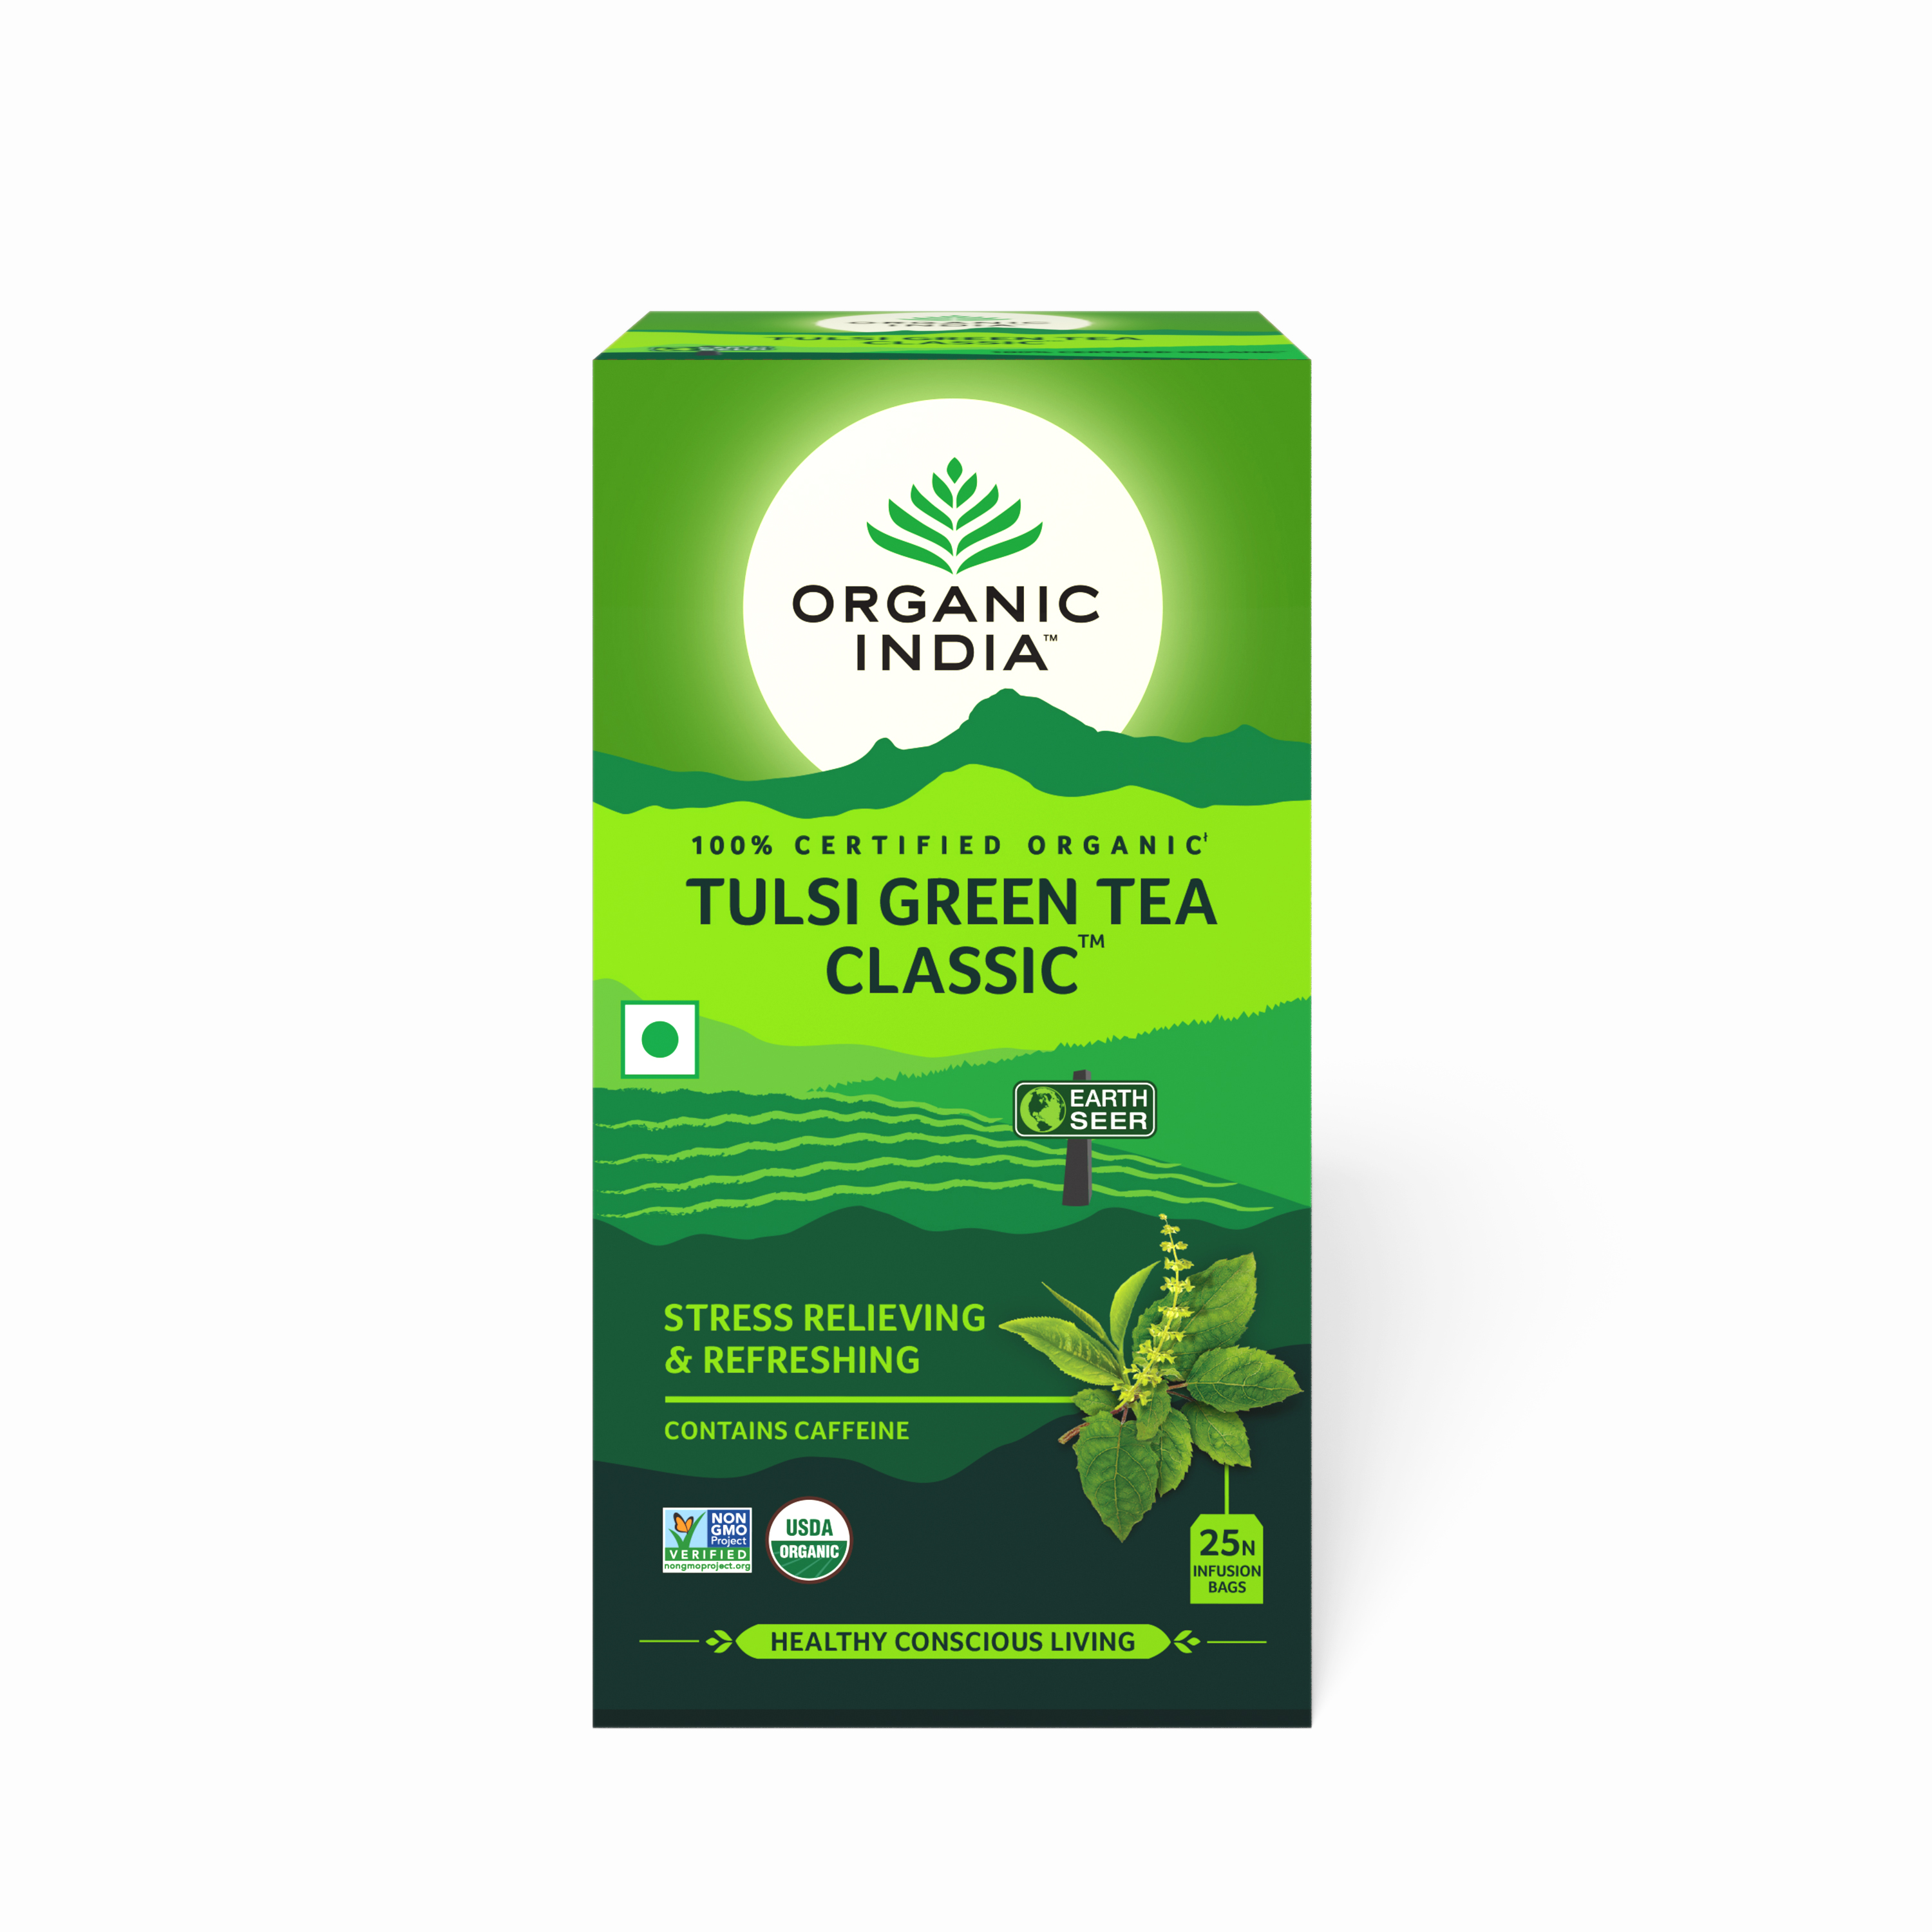 Buy Organic India Tulsi Green Classic at Best Price Online